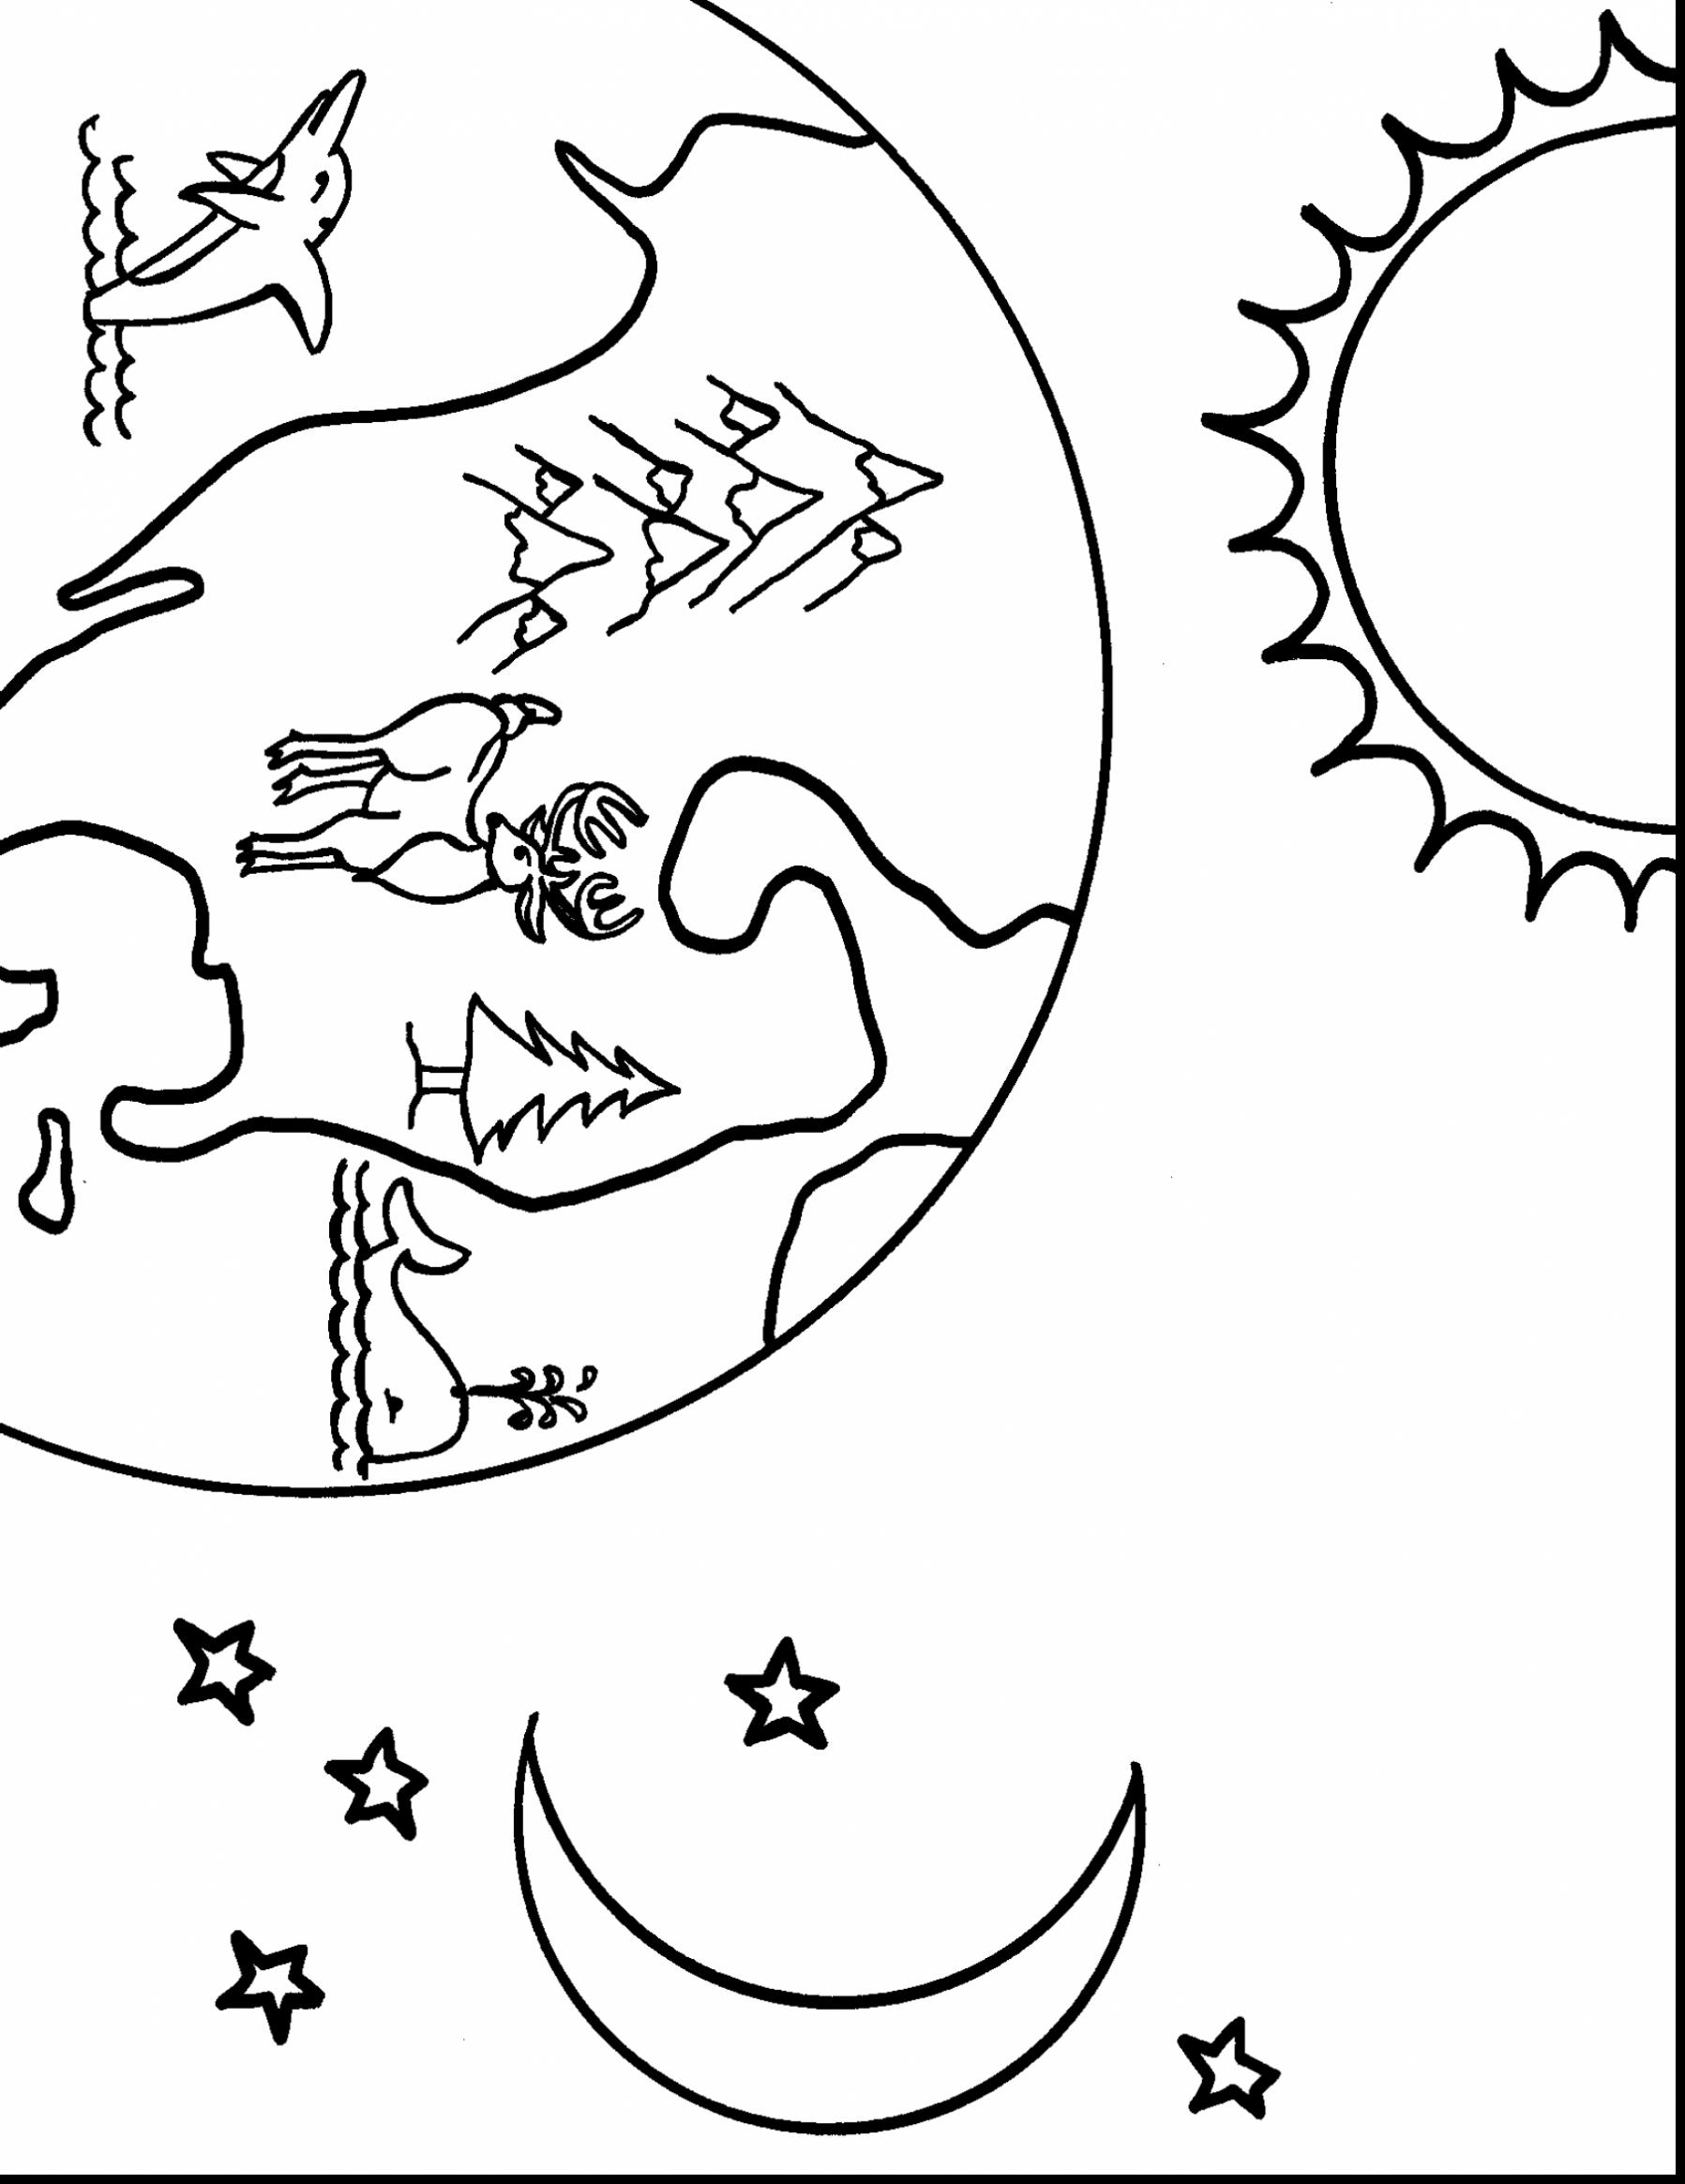 Earth Science Coloring Pages at GetColorings.com | Free printable